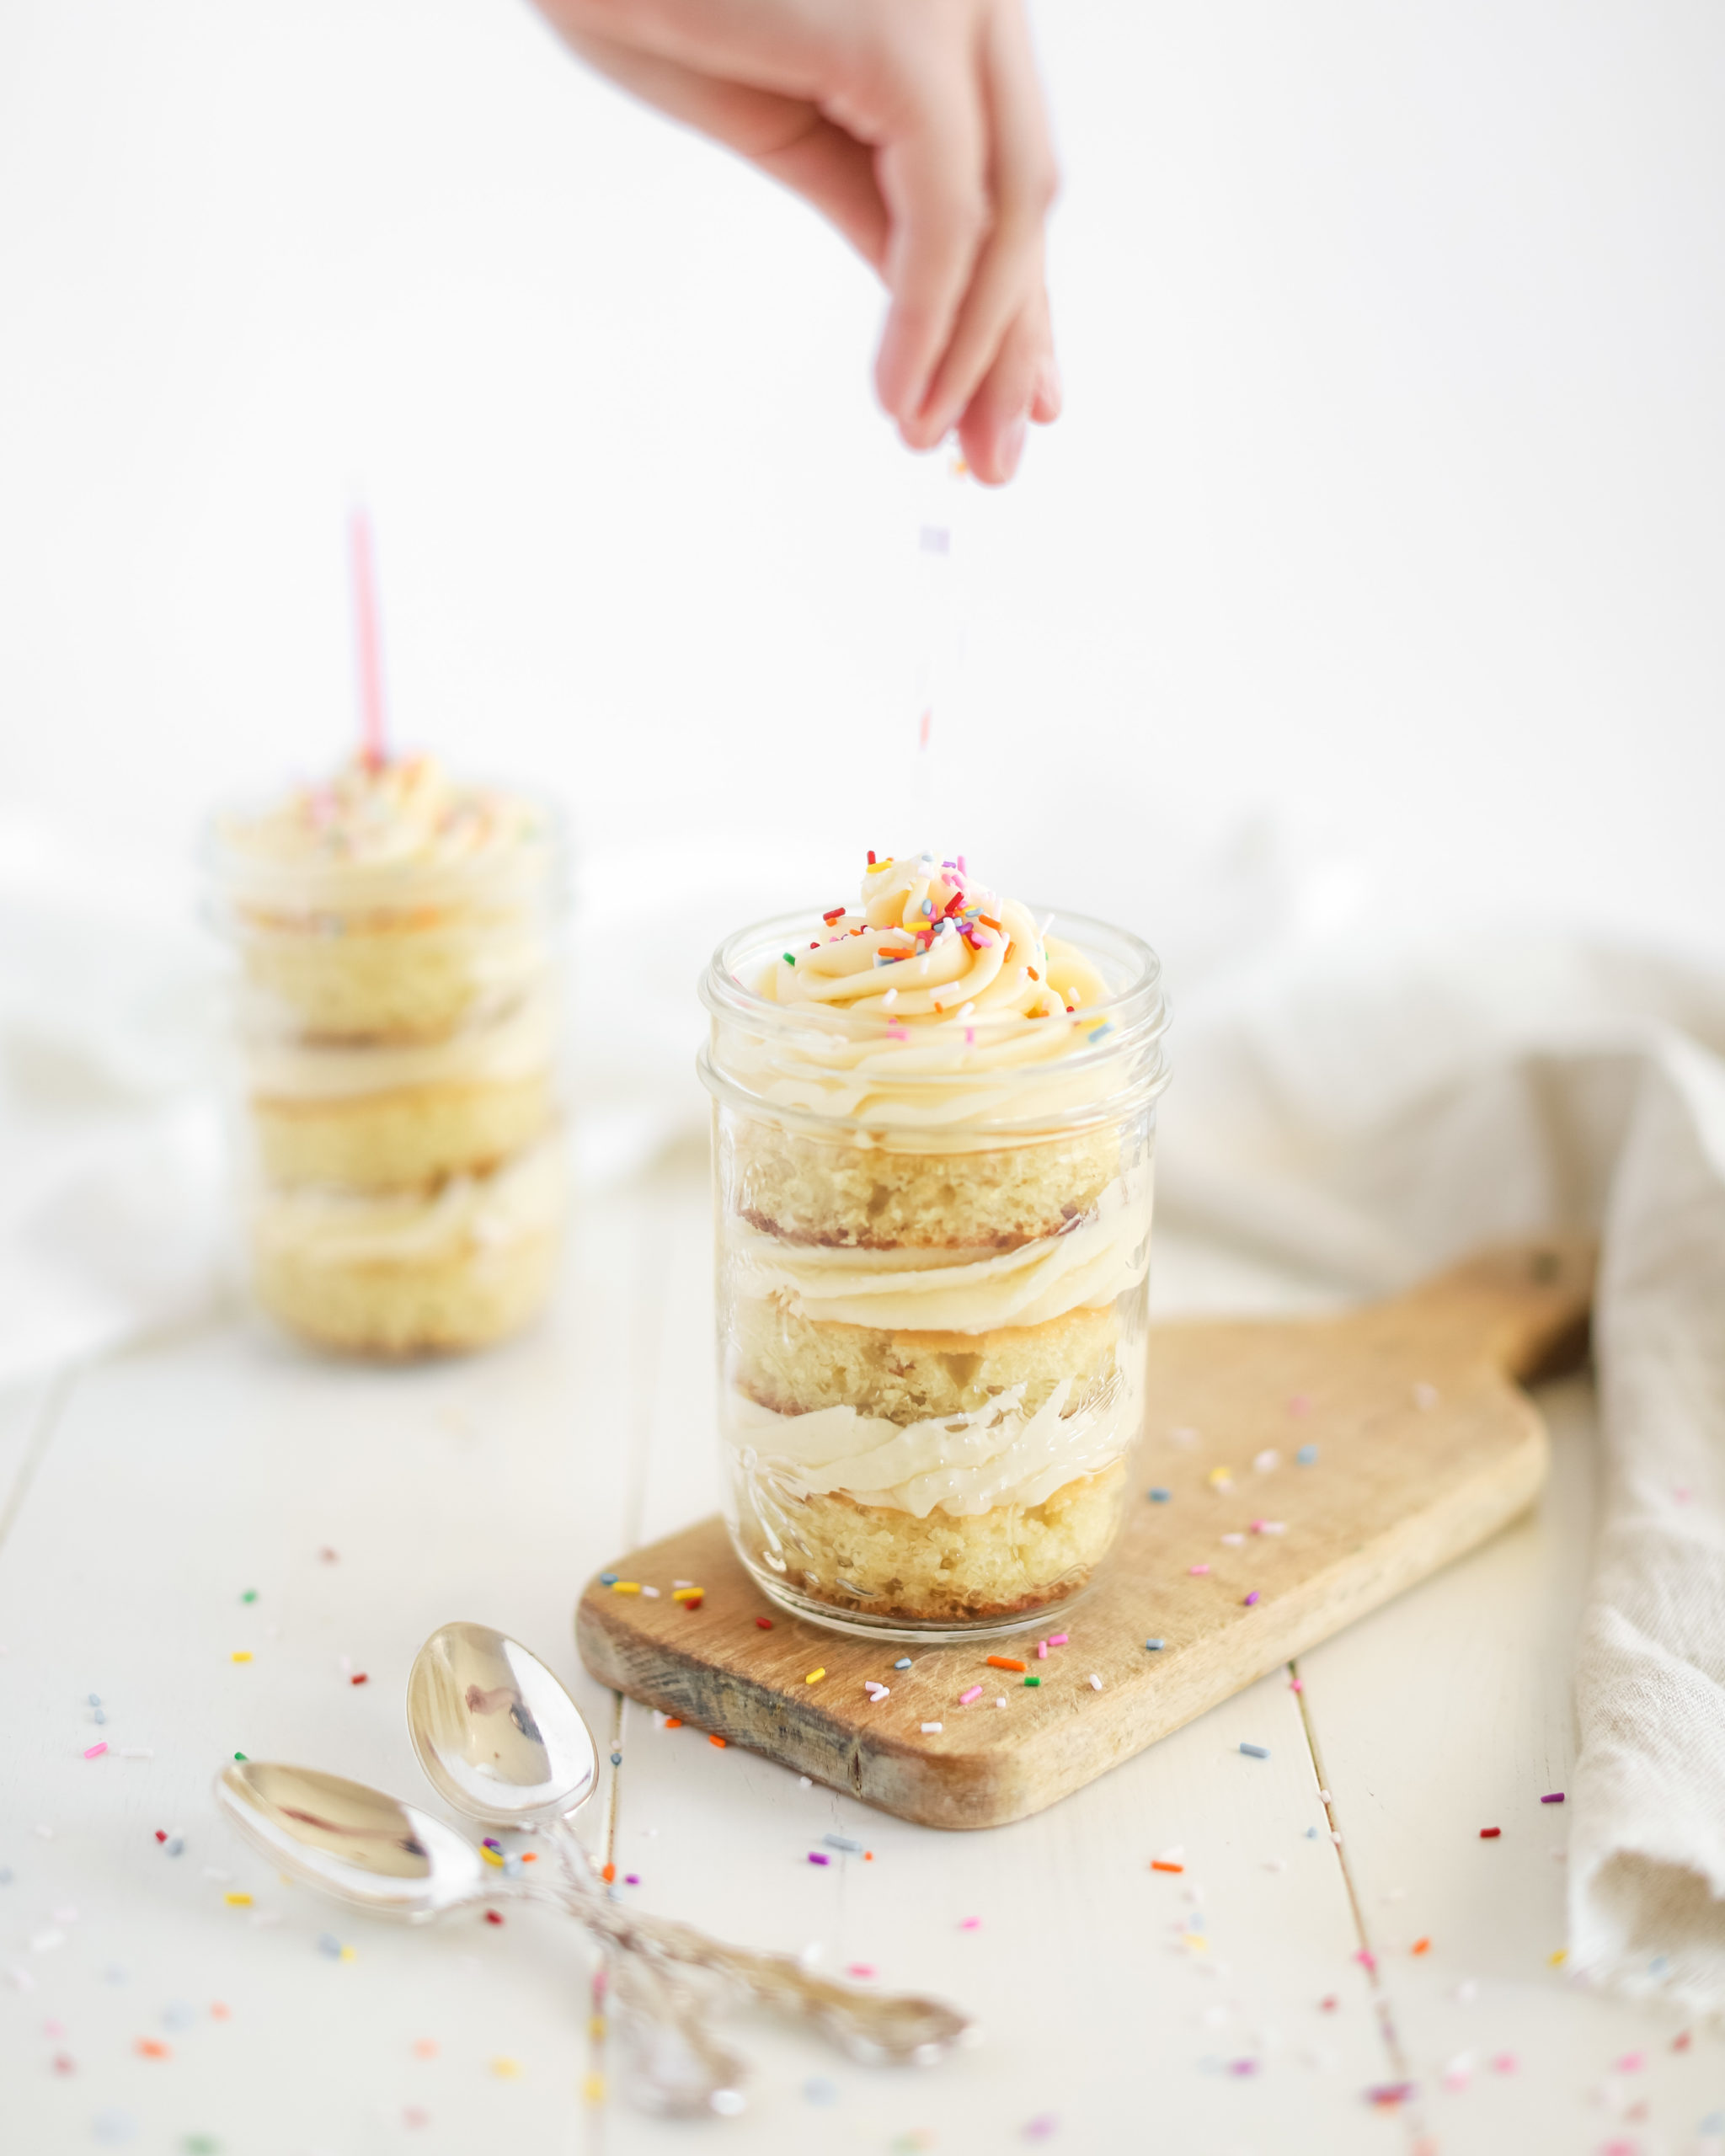 a hand topping a birthday cake in a jar with sprinkles